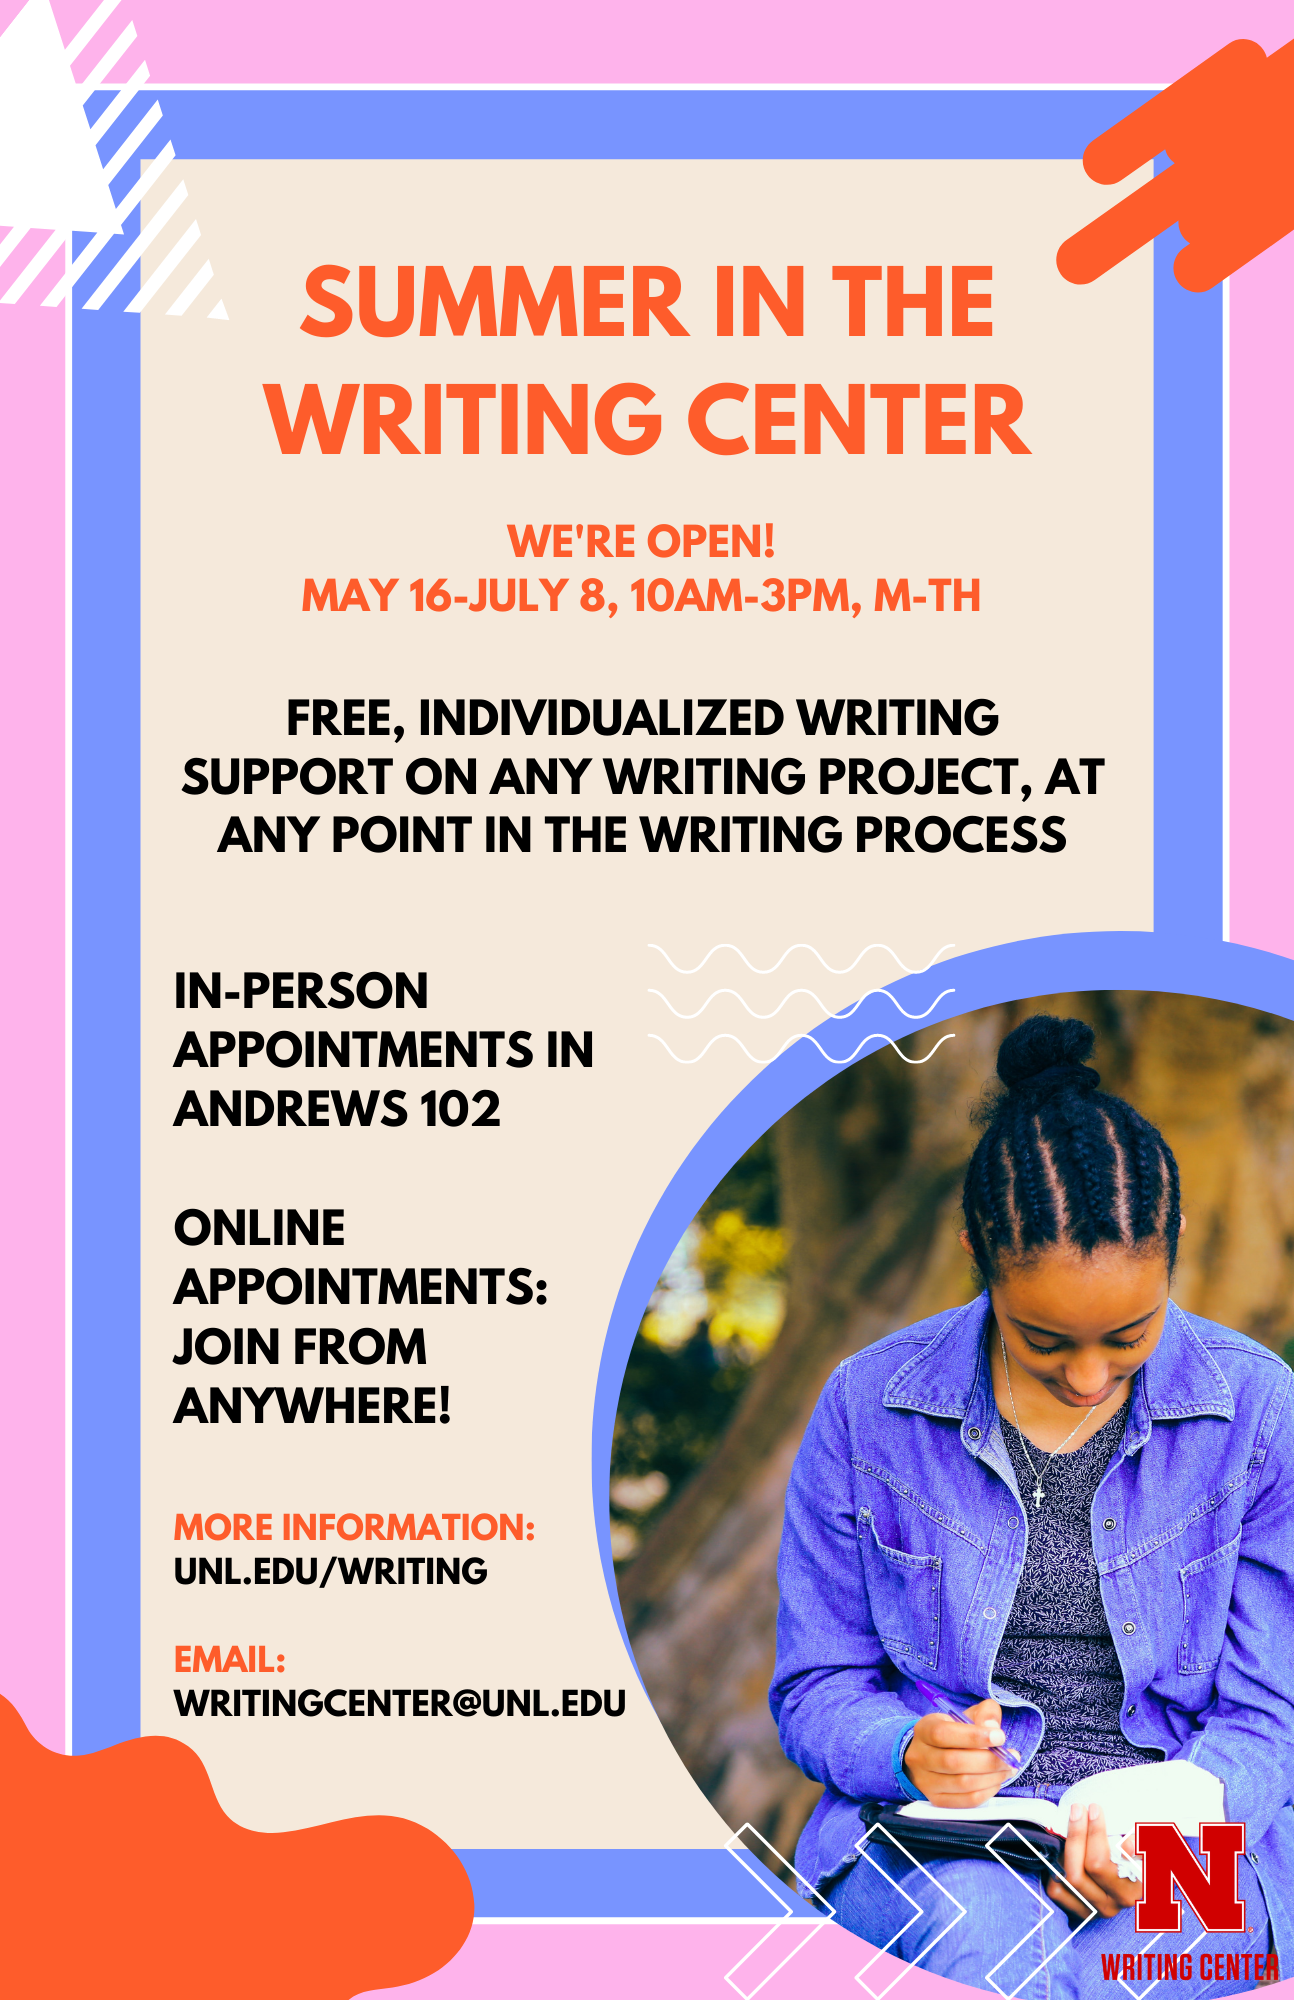 This summer, the Writing Center is excited to offer three ways for graduate students to receive no-cost support with their writing projects: a Virtual Writing Retreat, Summer Writing Groups, and Summer Hours.